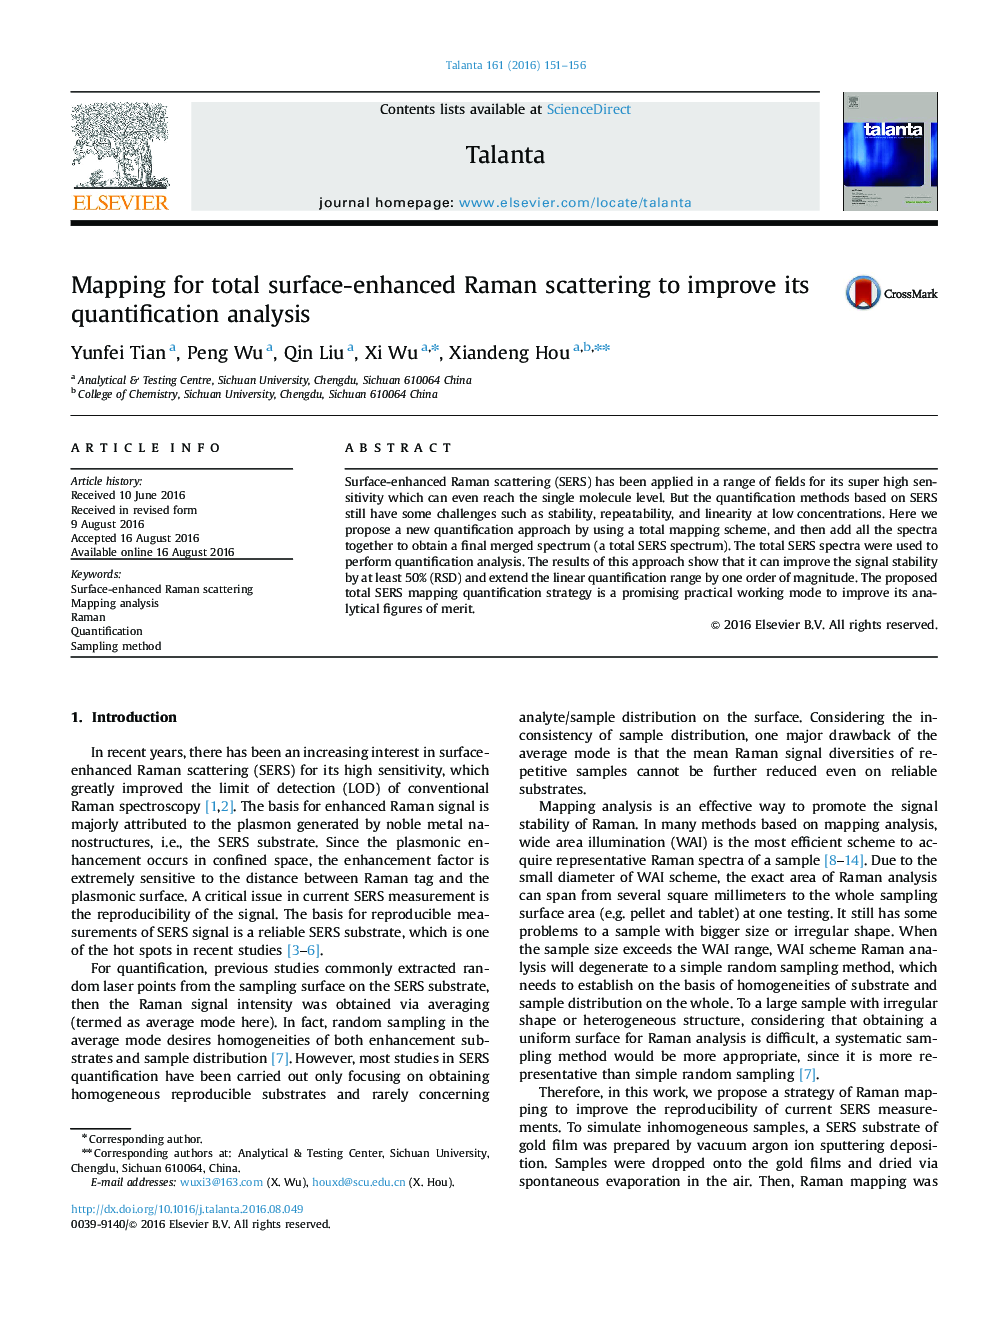 Mapping for total surface-enhanced Raman scattering to improve its quantification analysis